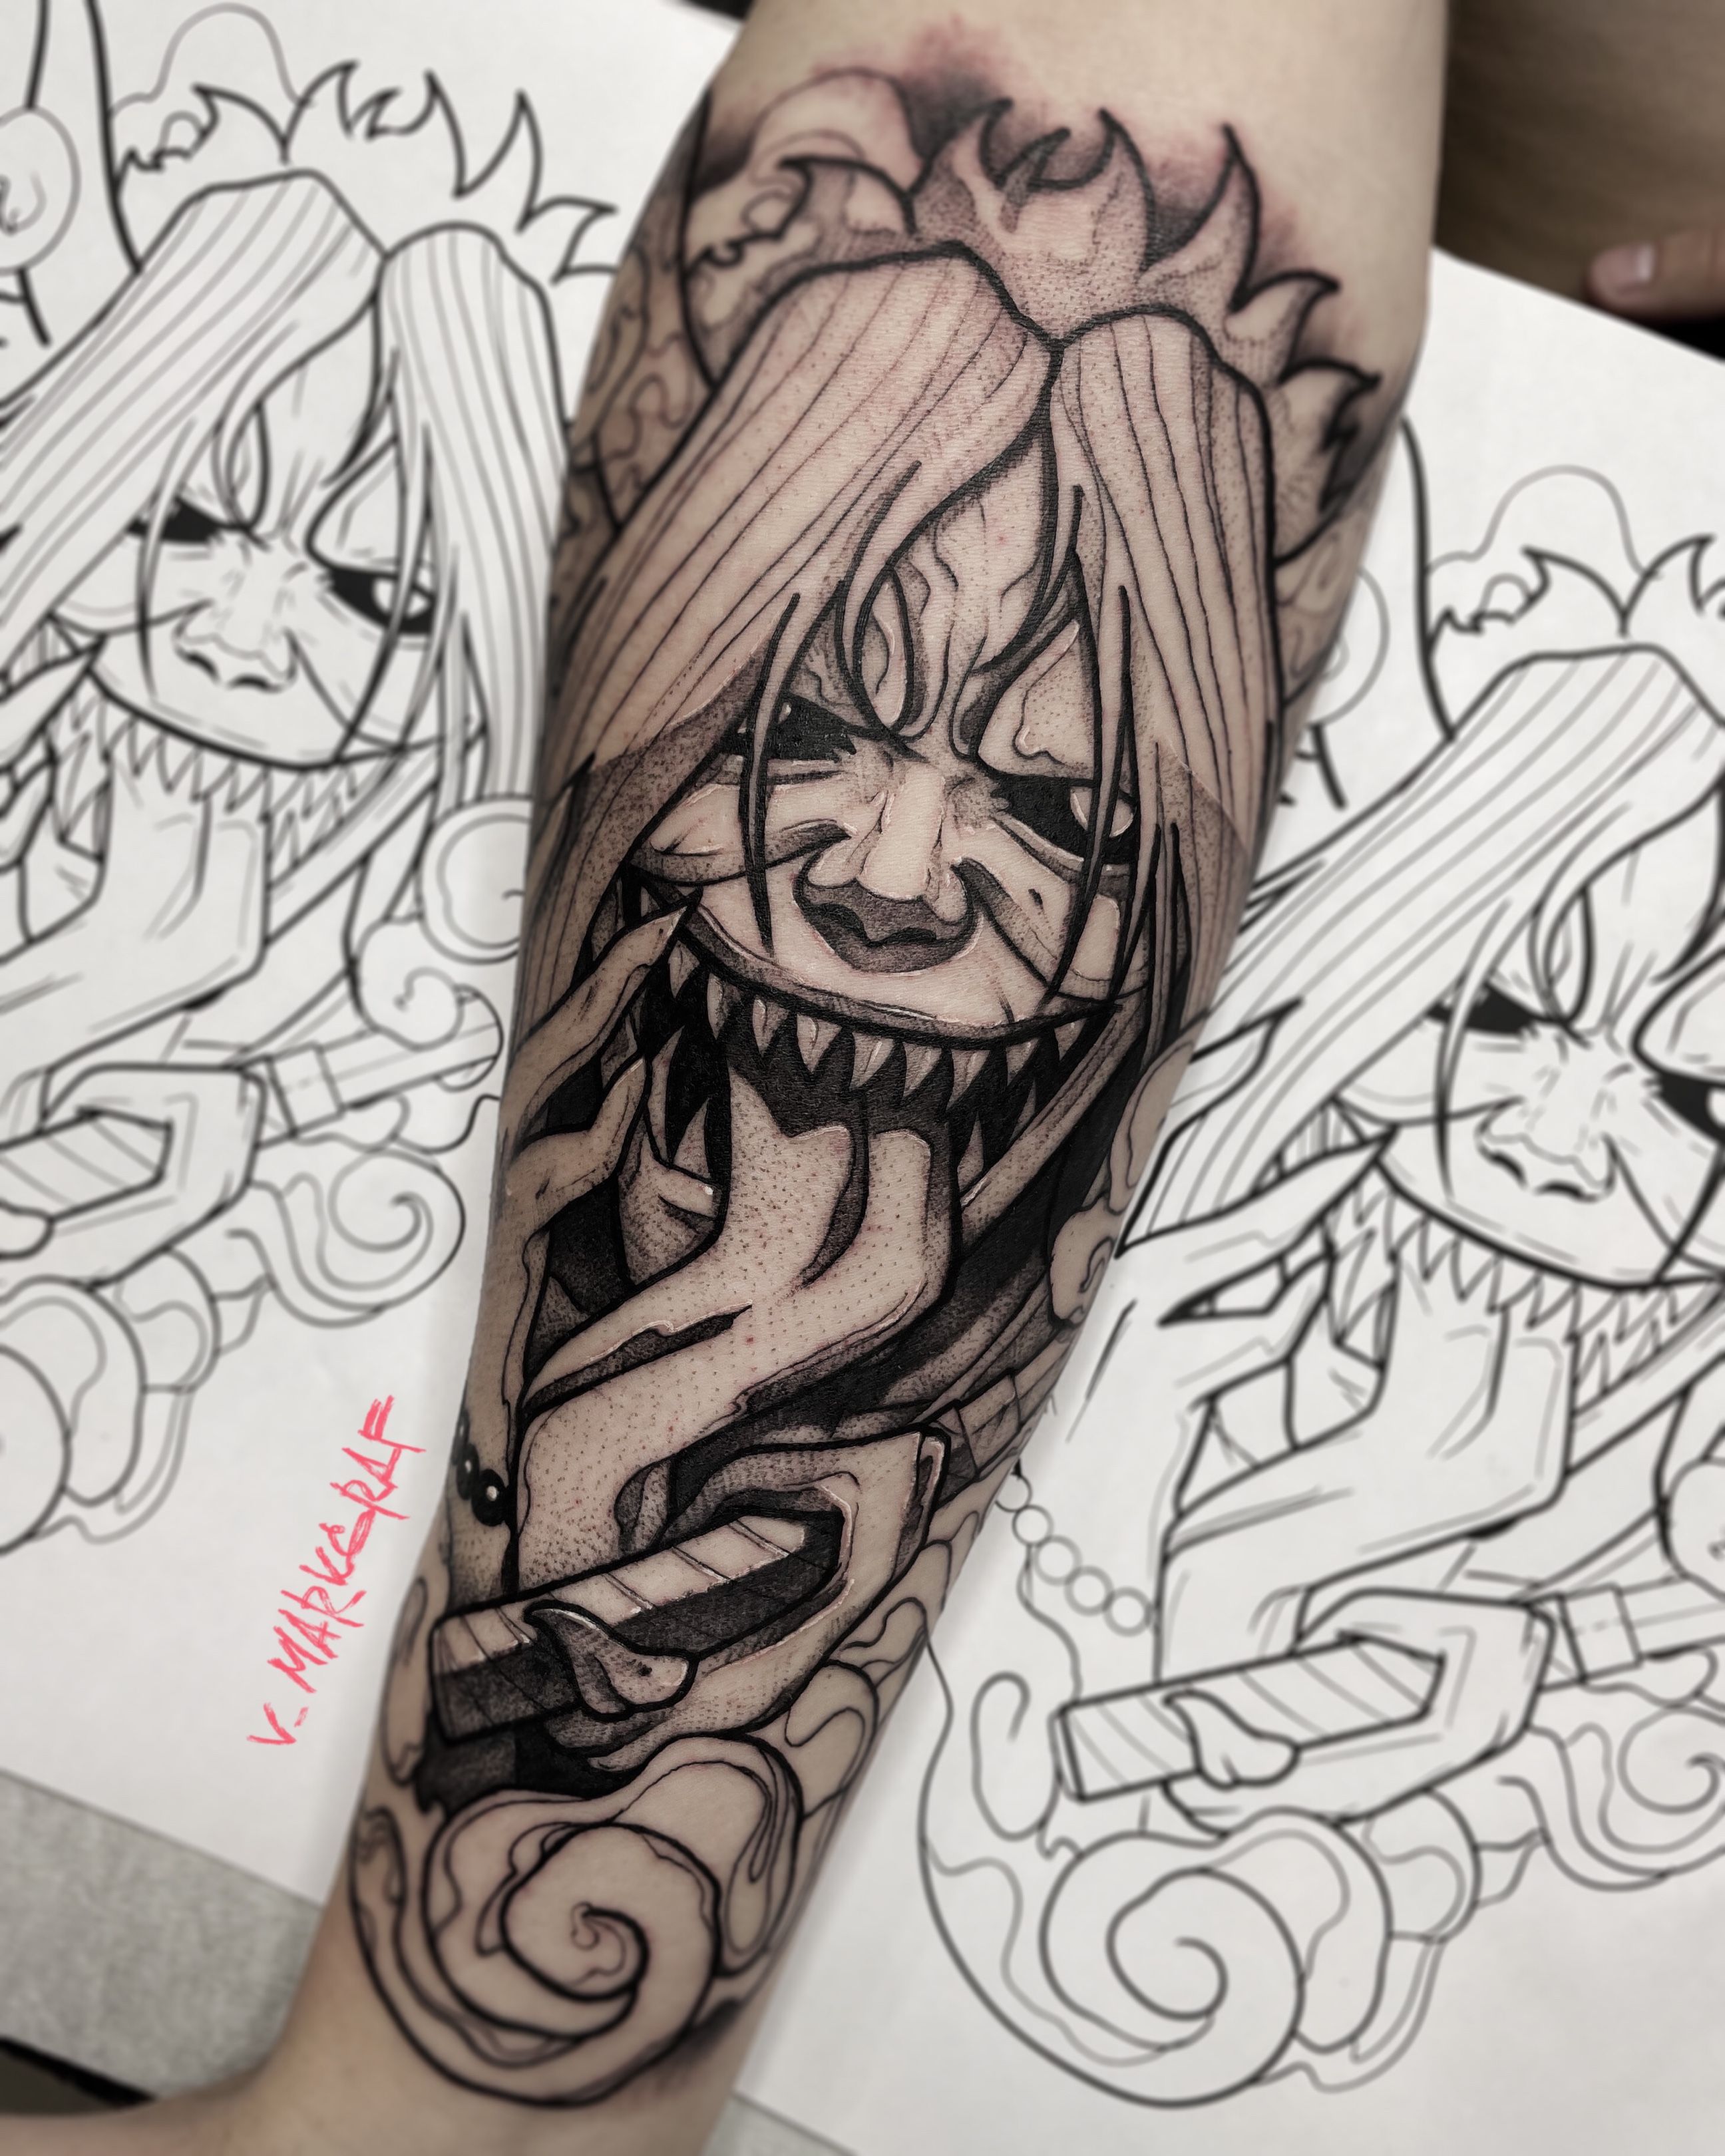 Today I did a tattoo of Minato and his Reaper Death Seal Jutsu Thought you  guys might enjoy  rNaruto